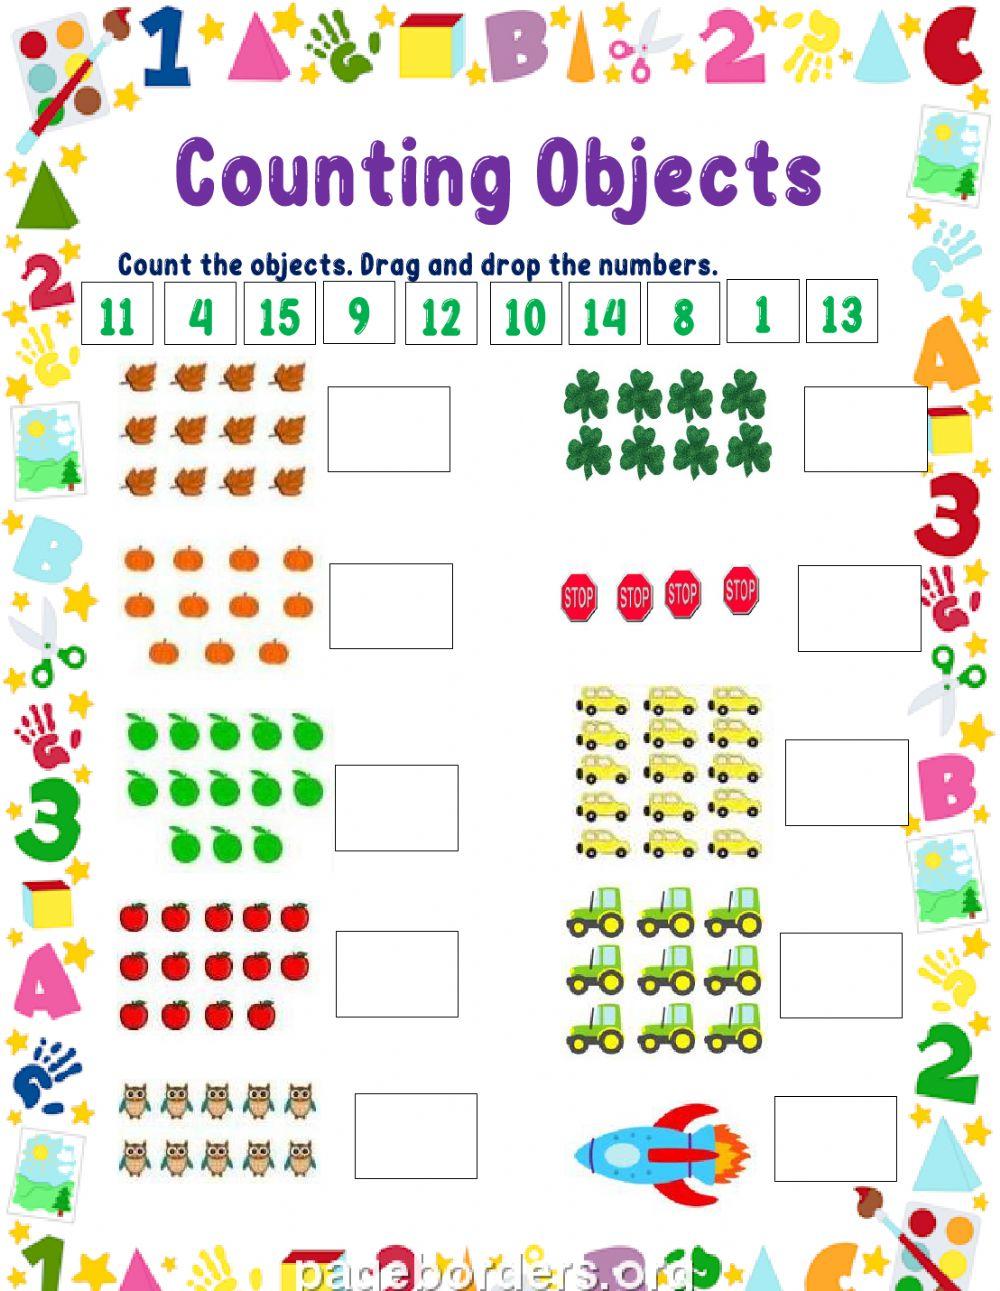 Counting- addition